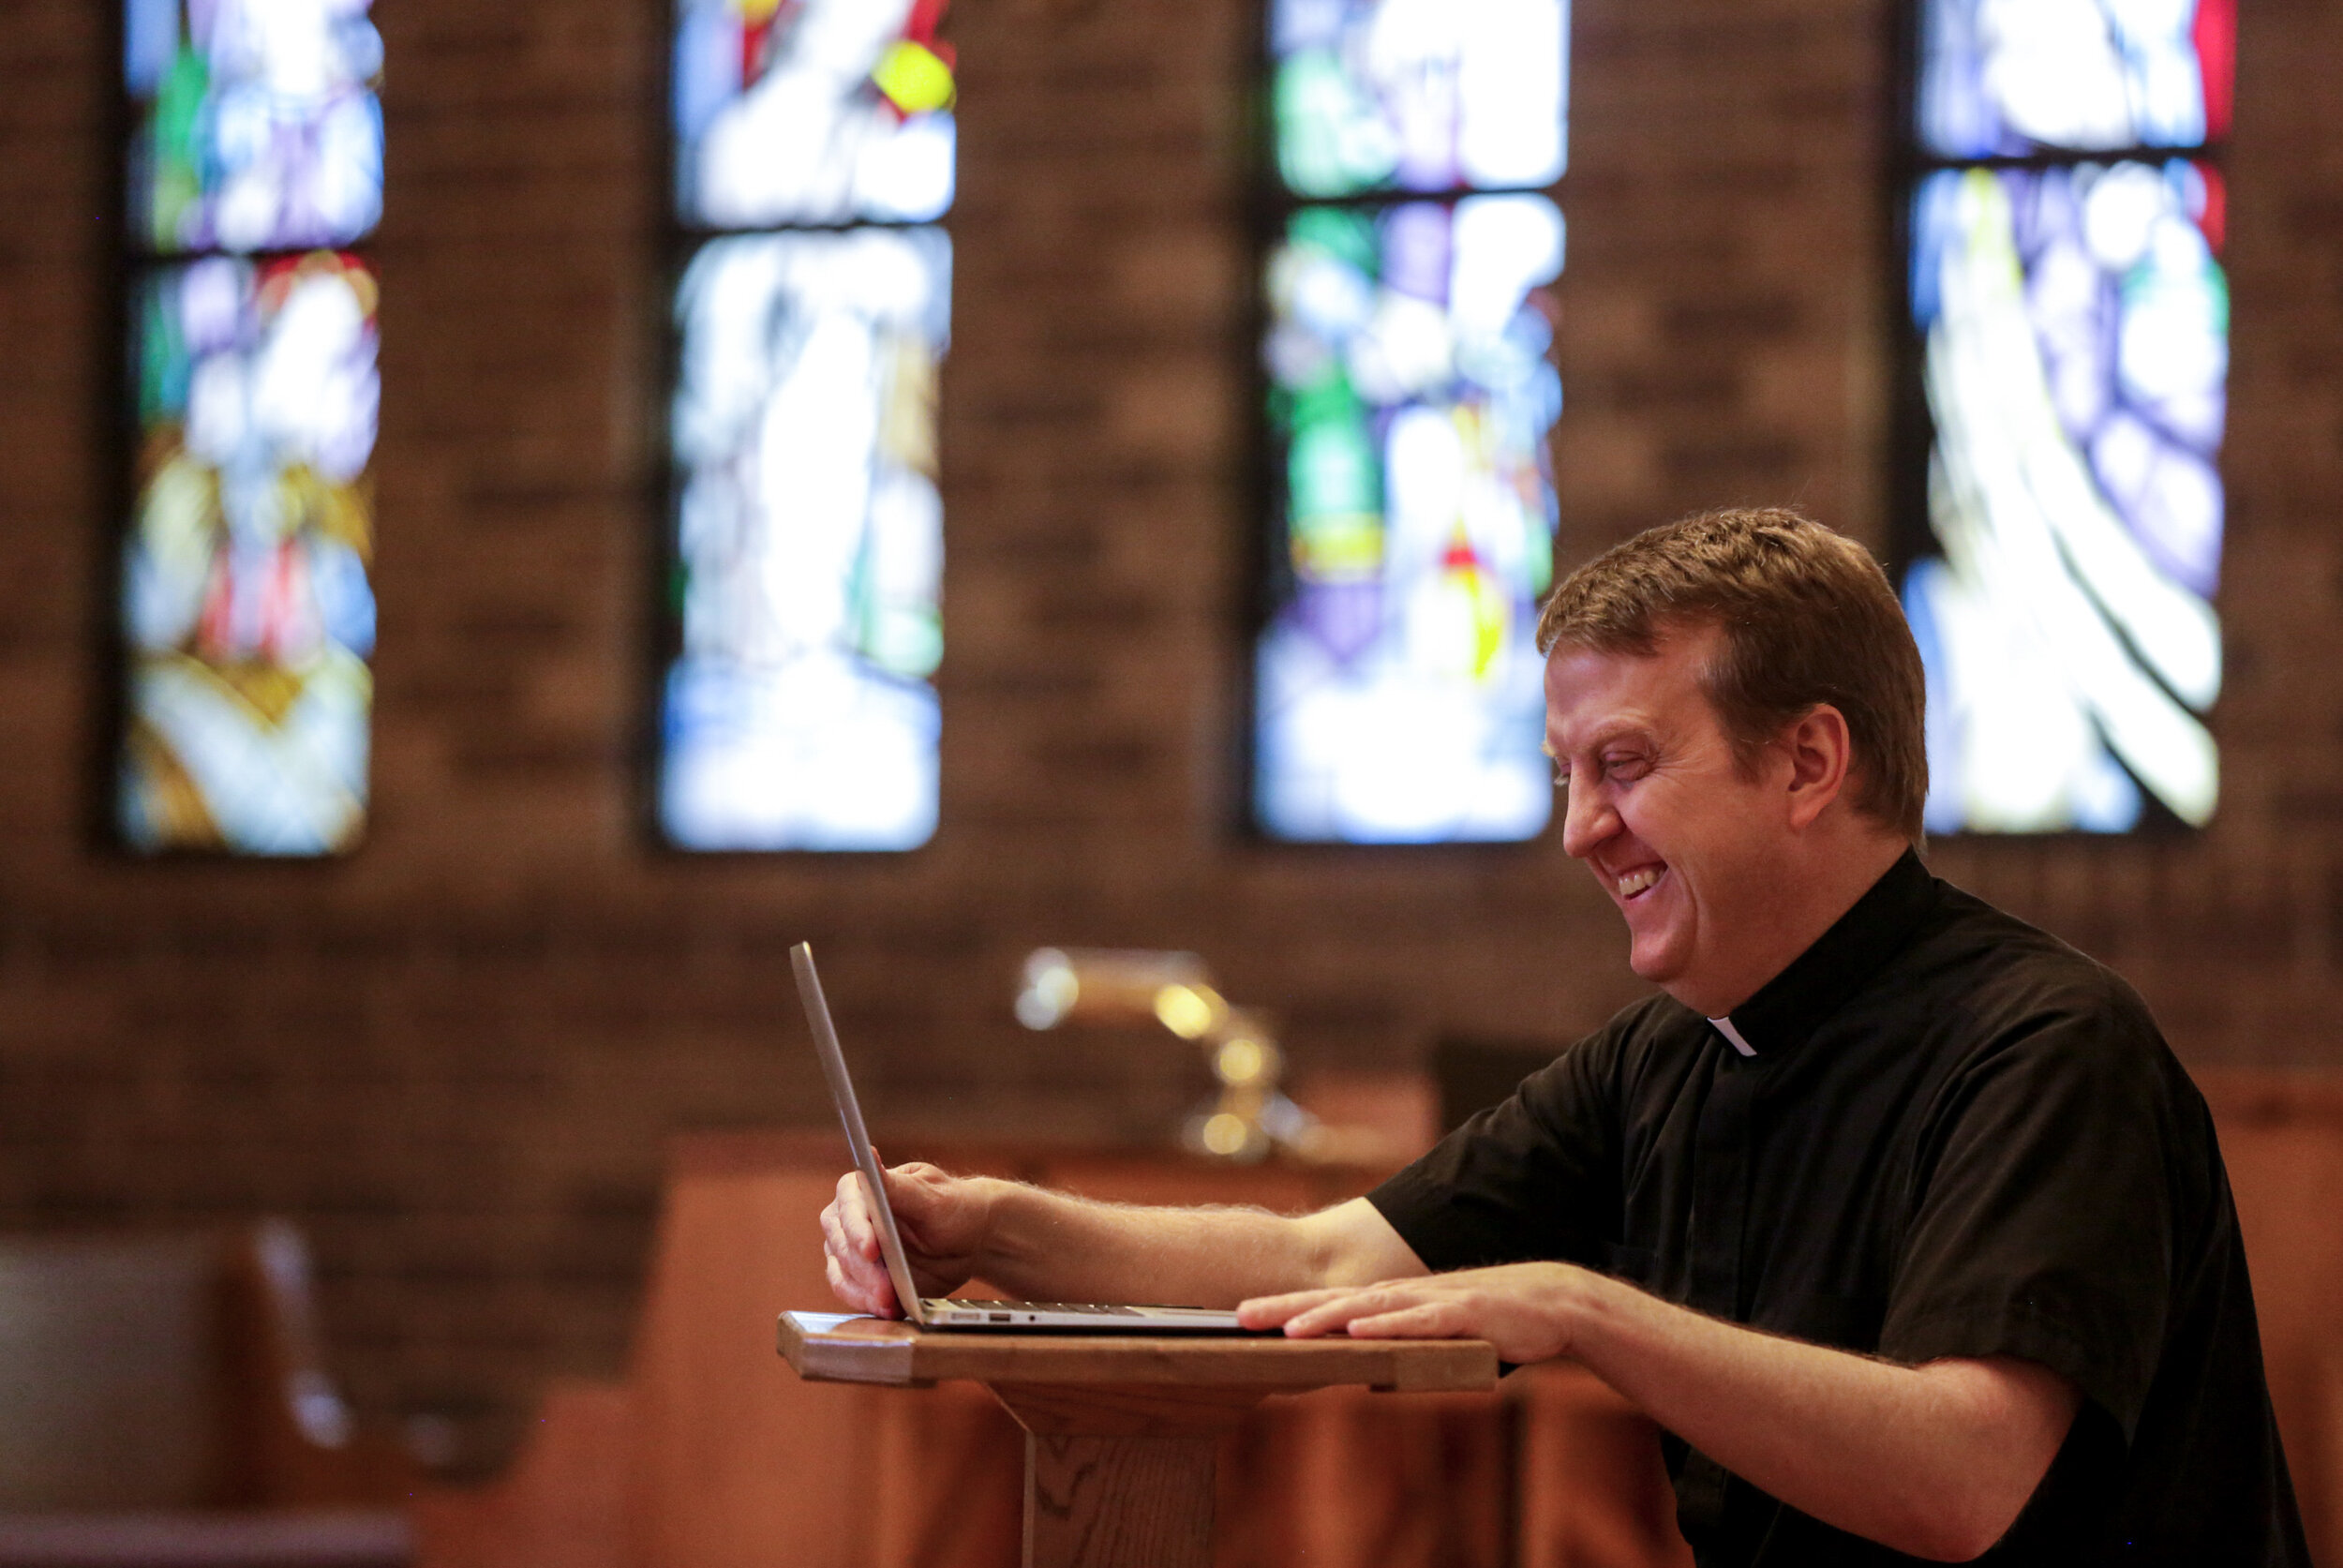  Rev. Mark Murphy gets his laptop ready to live-stream mass at St. Jude’s Catholic Church in Cedar Rapids, Iowa, on Saturday. St. Jude hasn’t previously relied on recording or streaming mass, so Murphy improvised by placing his laptop on a small tabl